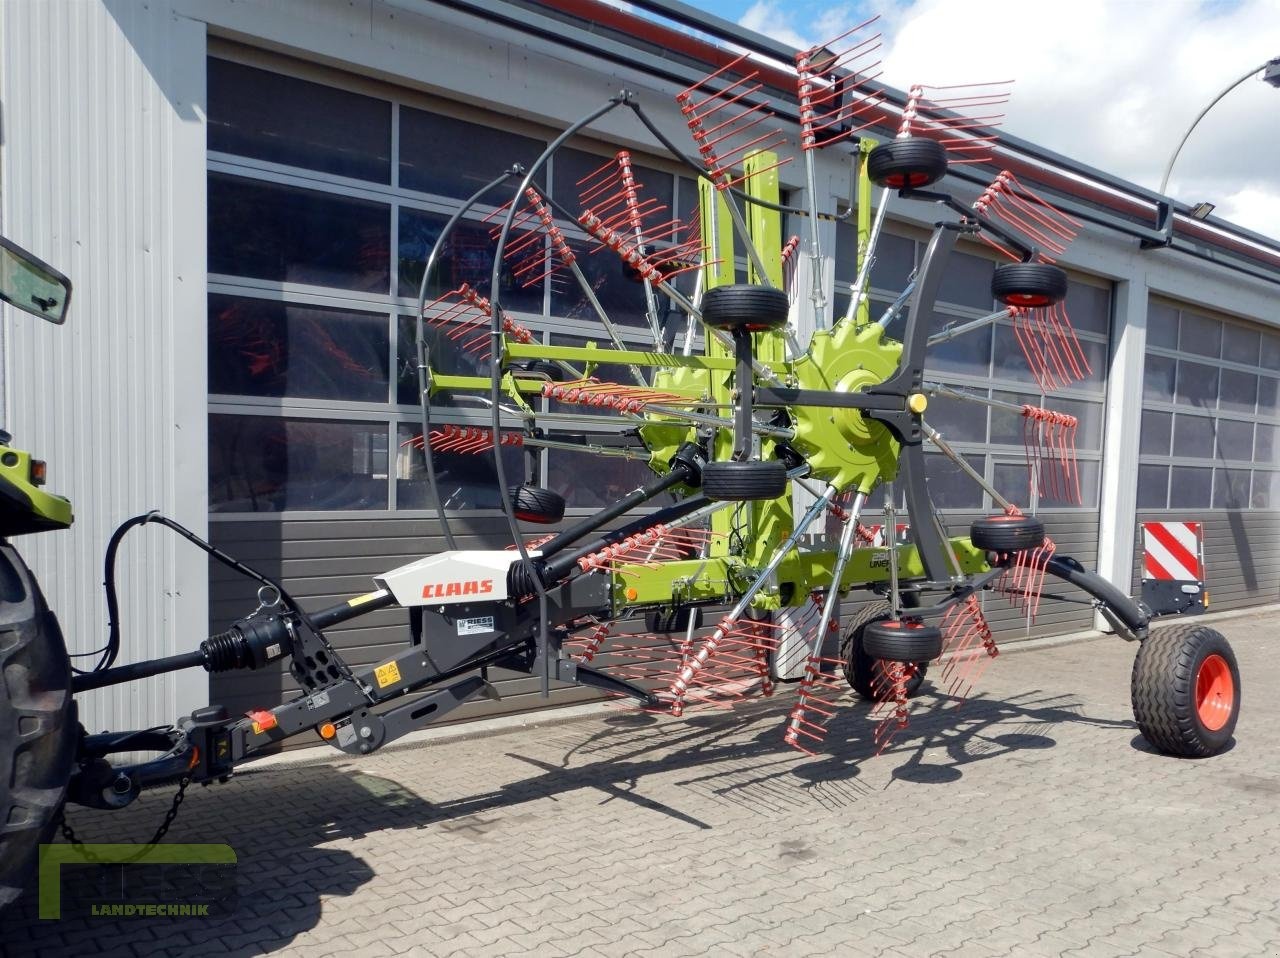 Claas Liner 2900 windrower €35,900